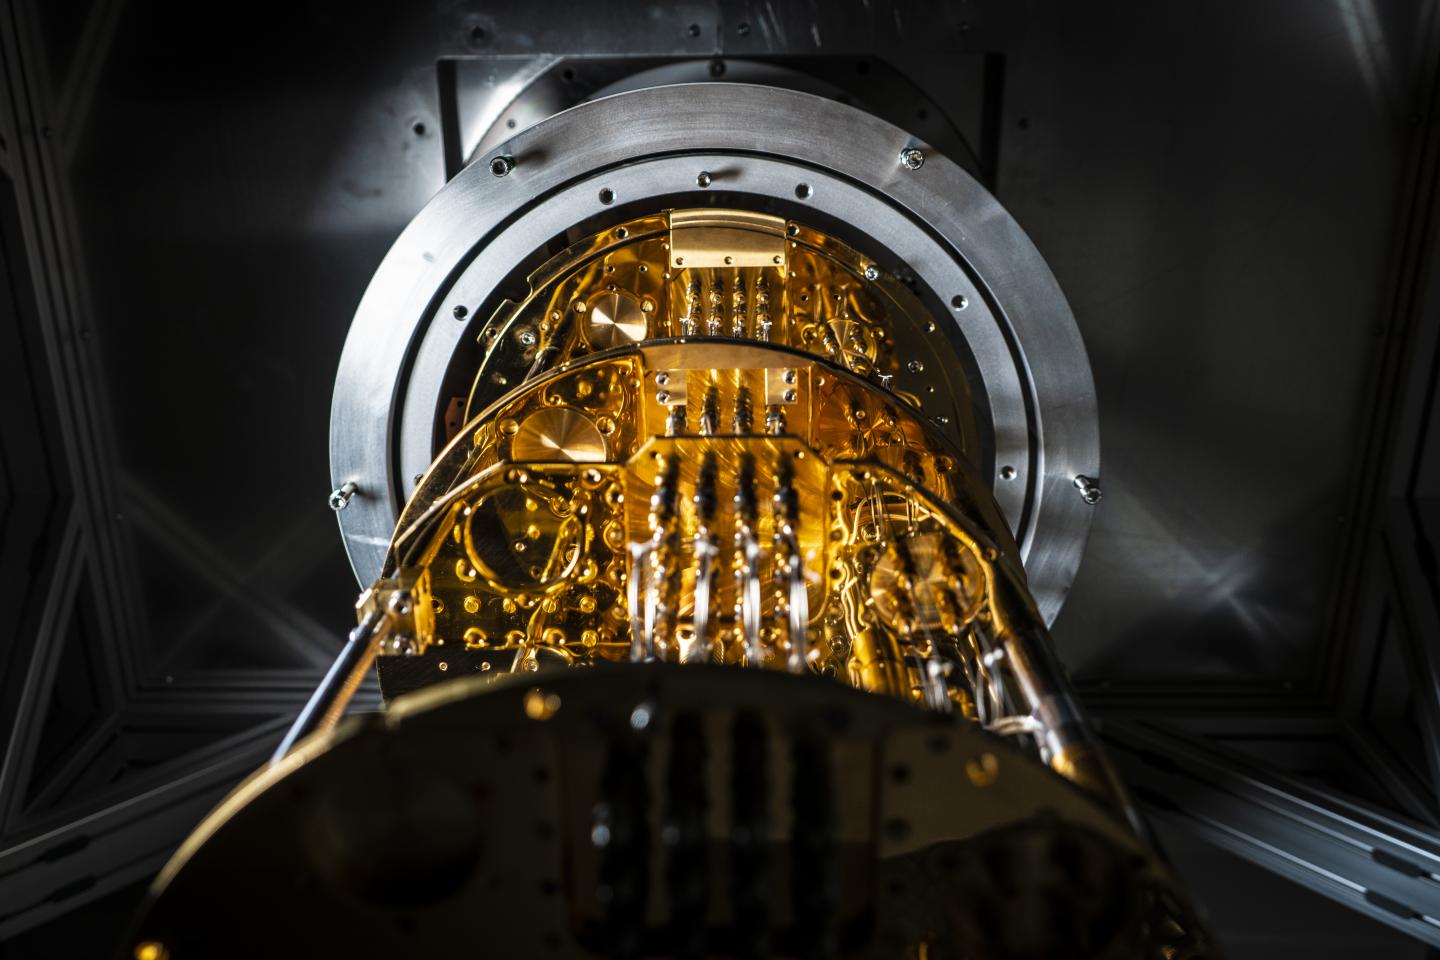 The Chalmers' quantum computer cryostat